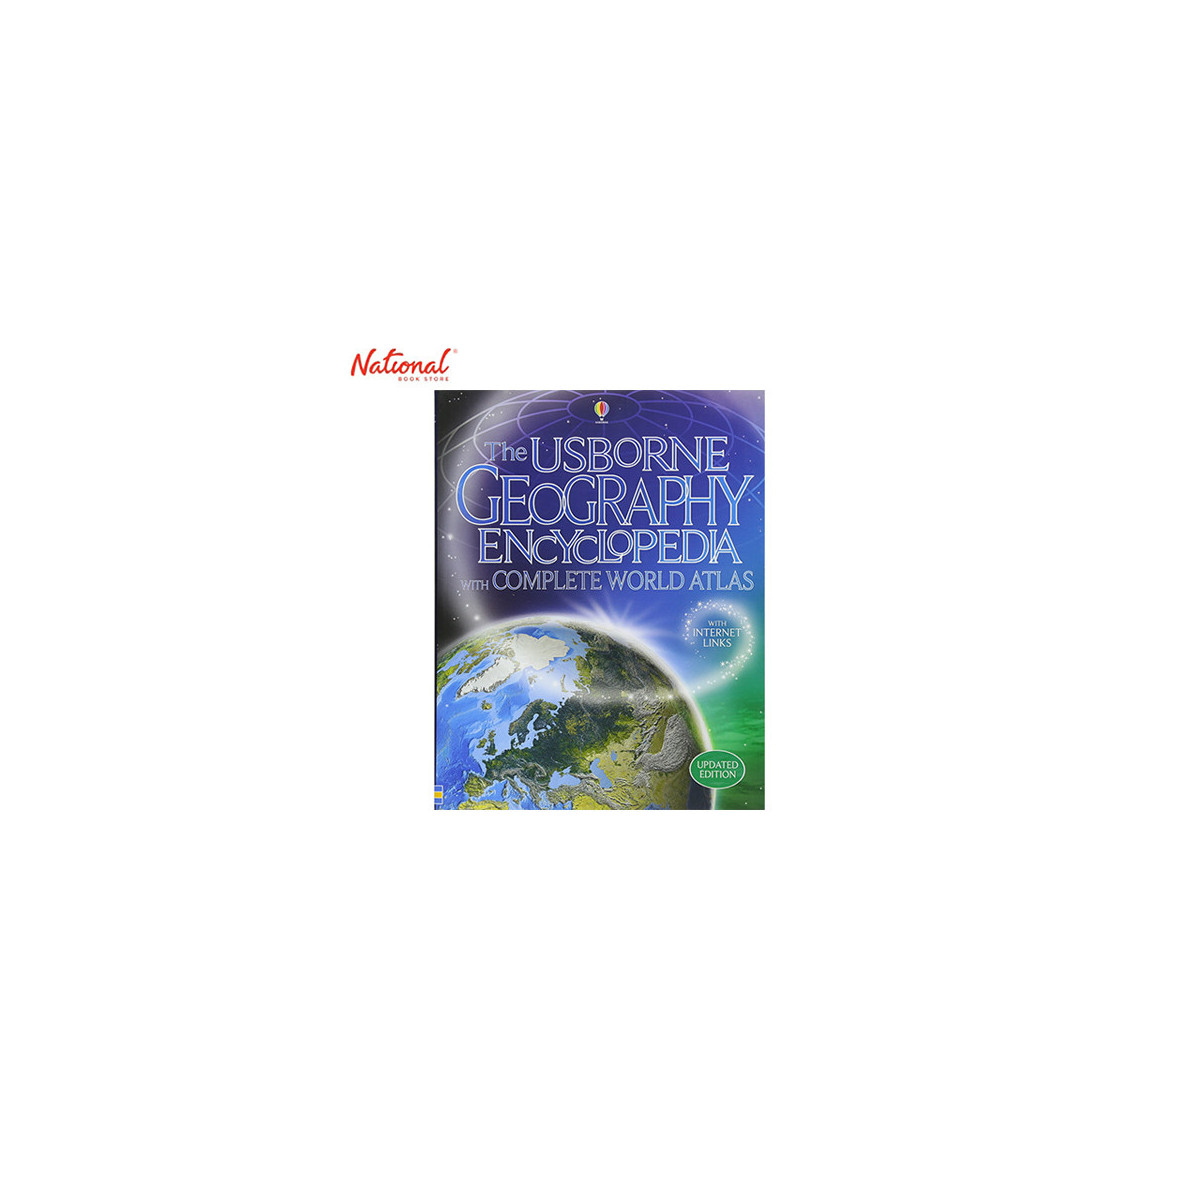 USBORNE GEOGRAPHY ENCYCLOPEDIA WITH COMPLETE WORLD ATLAS